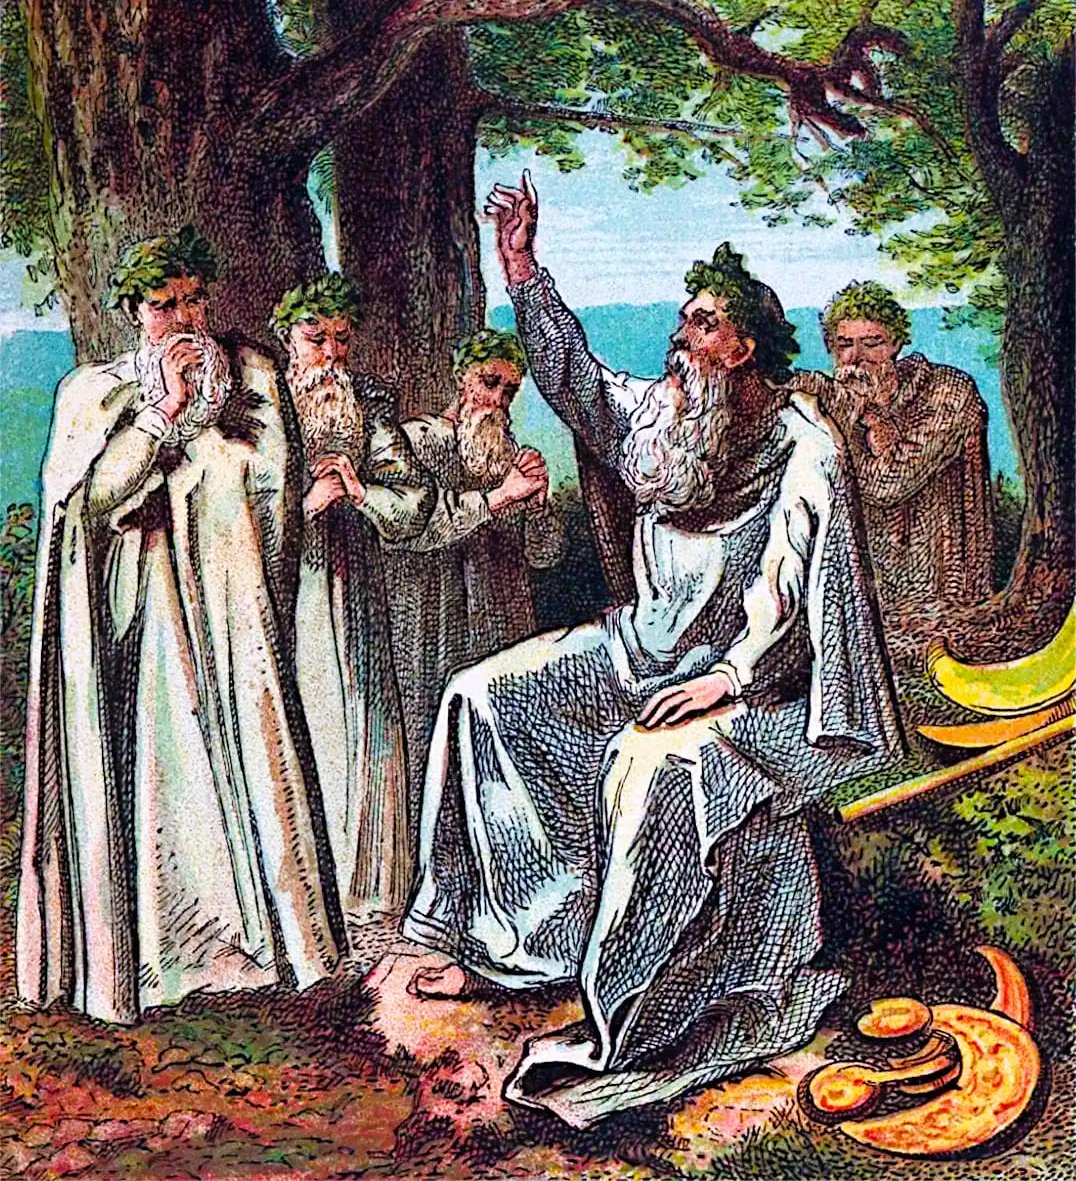 A 1868 illustration from 'Pictures of English History' depicting five druids, dressed in traditional robes, gathered under a large tree, engaged in what appears to be a ritual or discussion.